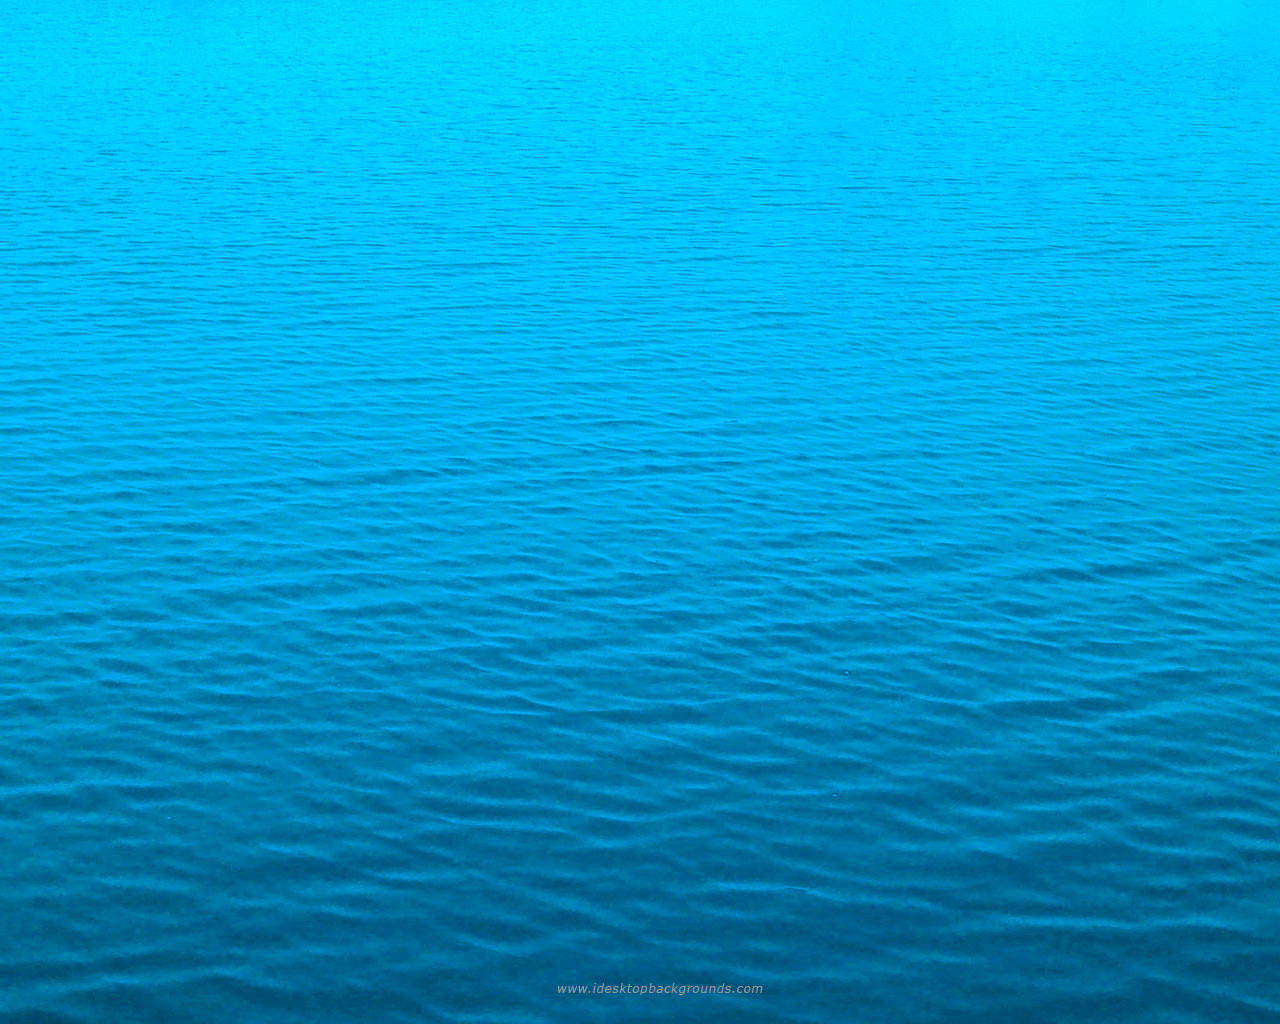 Free download for your wallpaper backgrounds or powerpoint templates free  download [1280x1024] for your Desktop, Mobile & Tablet | Explore 66+ Blue Water  Background | Water Backgrounds, Blue Water Wallpaper, Water Droplet  Wallpaper